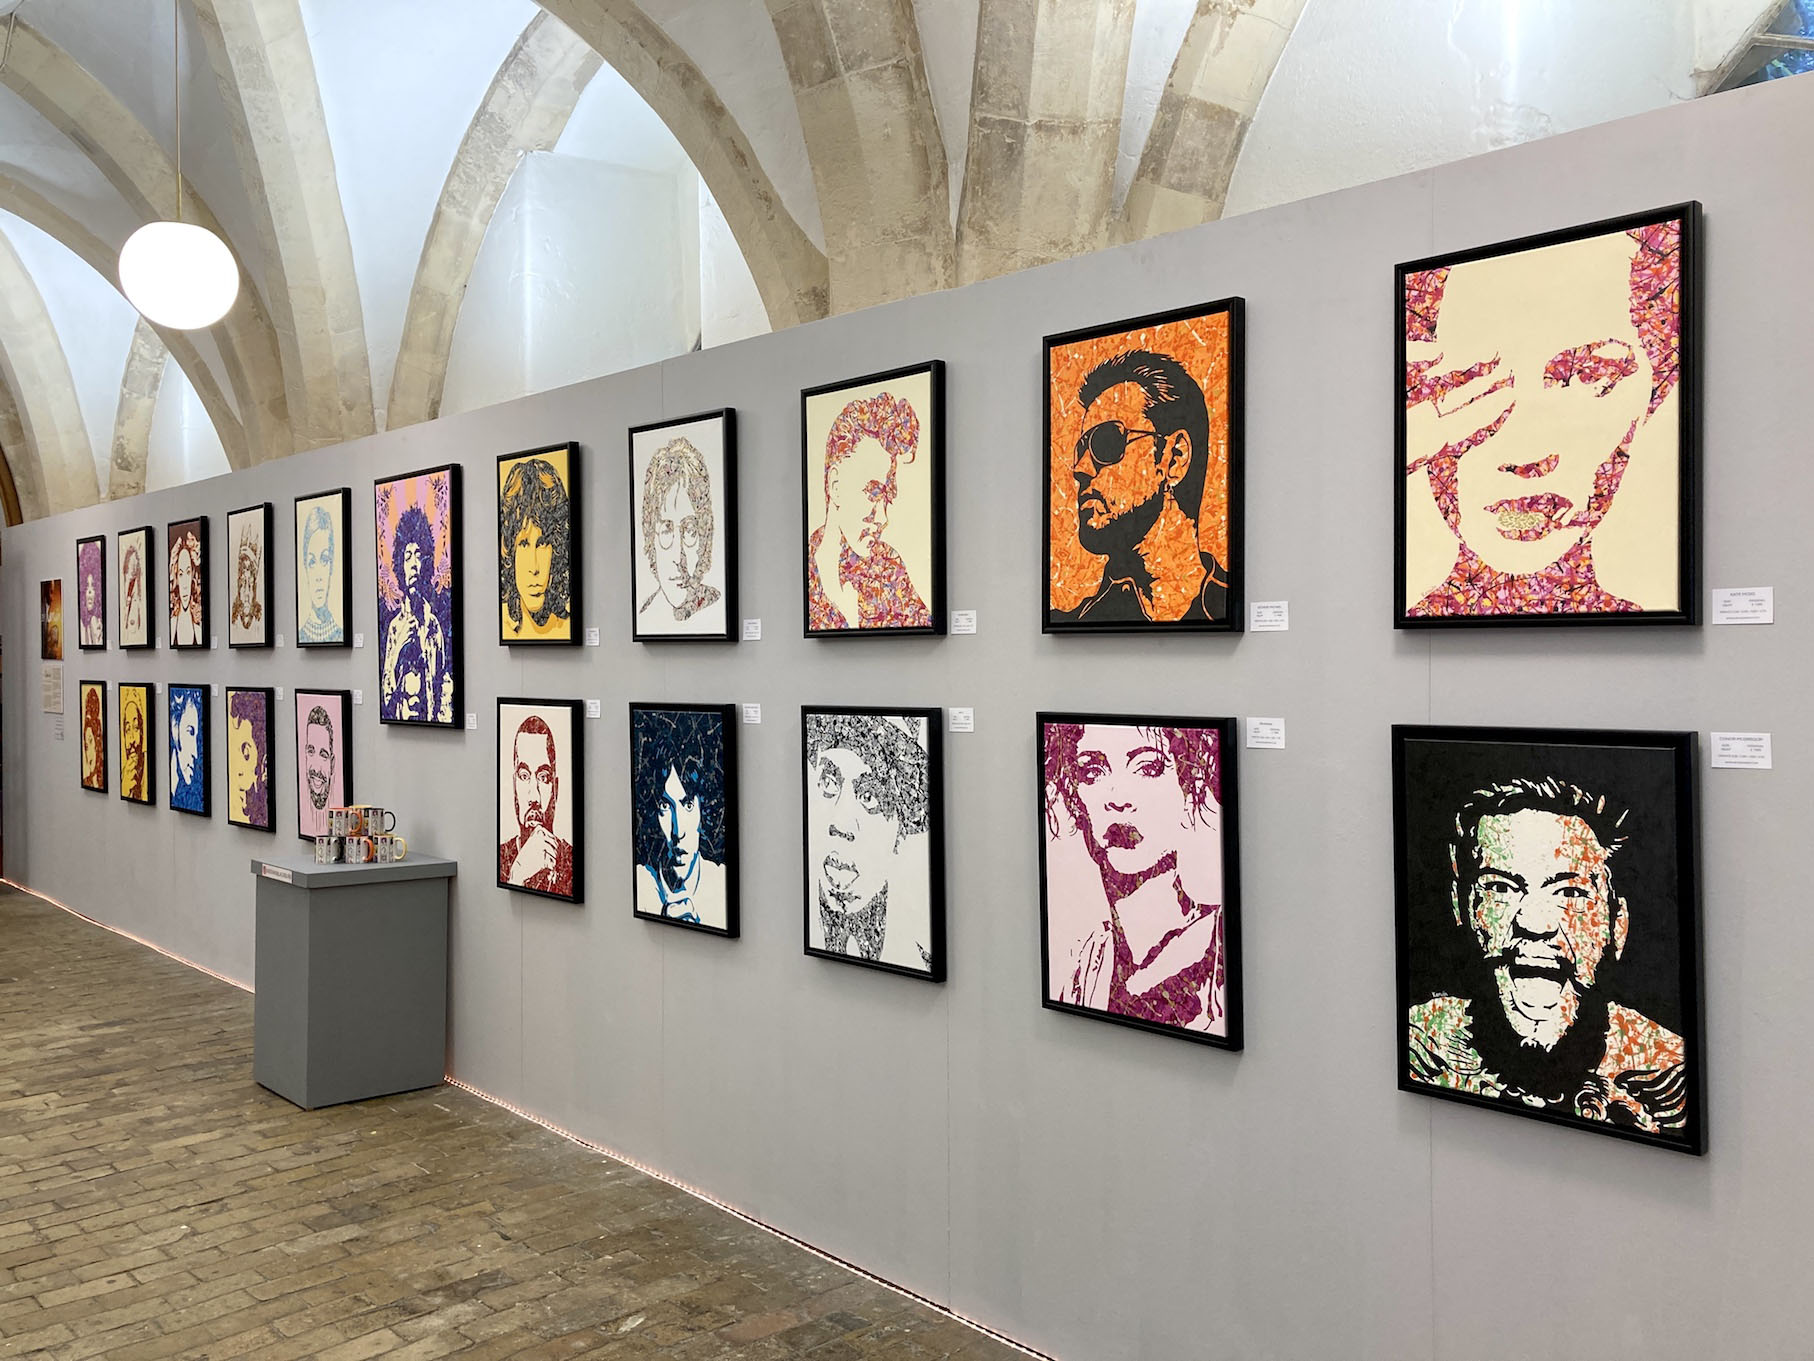 Kerwin Blackburn exhibiting his Jackson Pollock-inspired pop art music paintings at the Crypt Gallery at Norwich School in Norfolk, February-March 2022 | By Kerwin | Kate Moss | George Michael | Rihanna | Conor McGregor prints